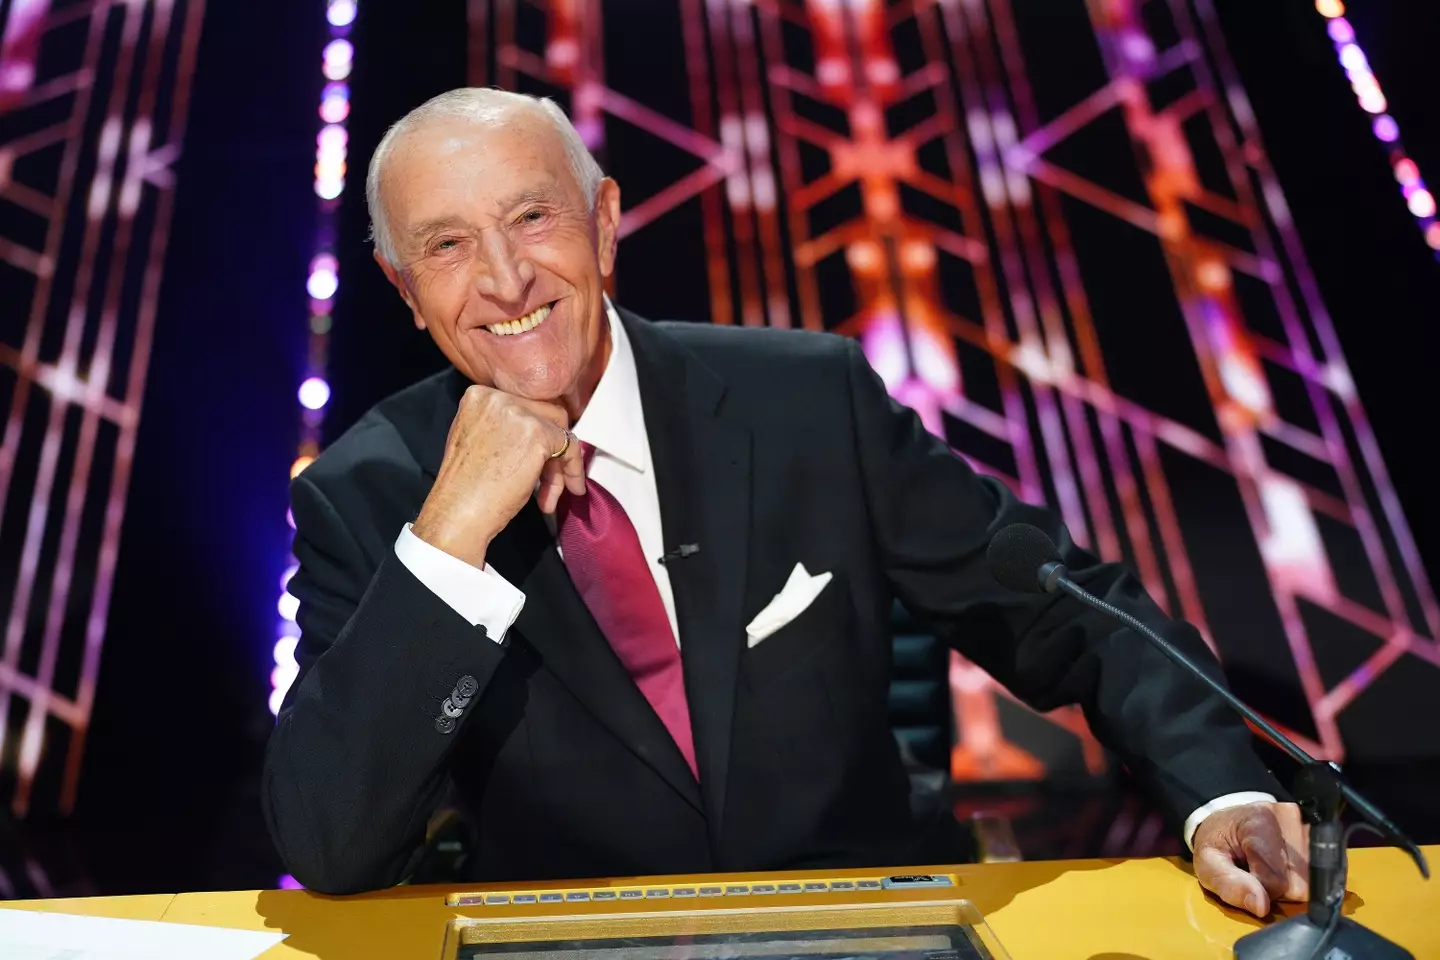 Strictly judge Len Goodman passed away from bone cancer this year.